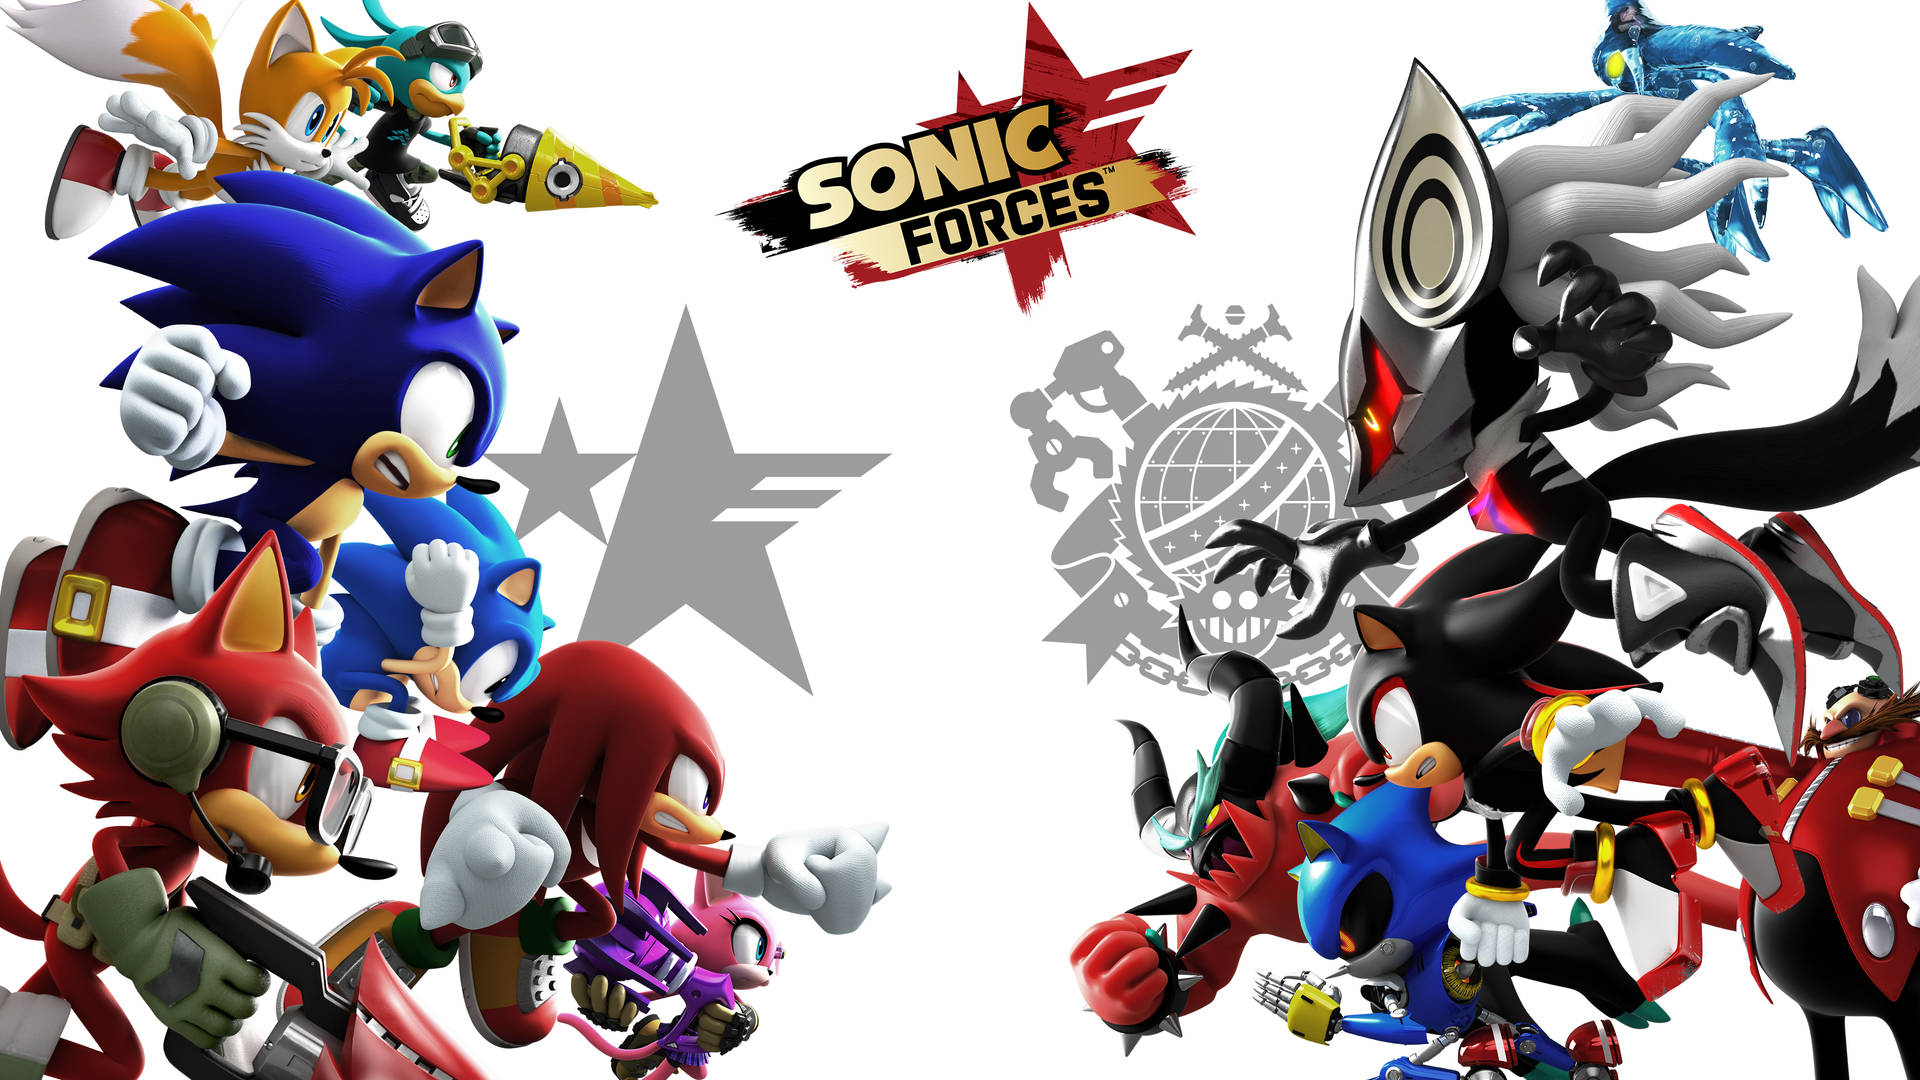 Eggman With Sonic Forces Background